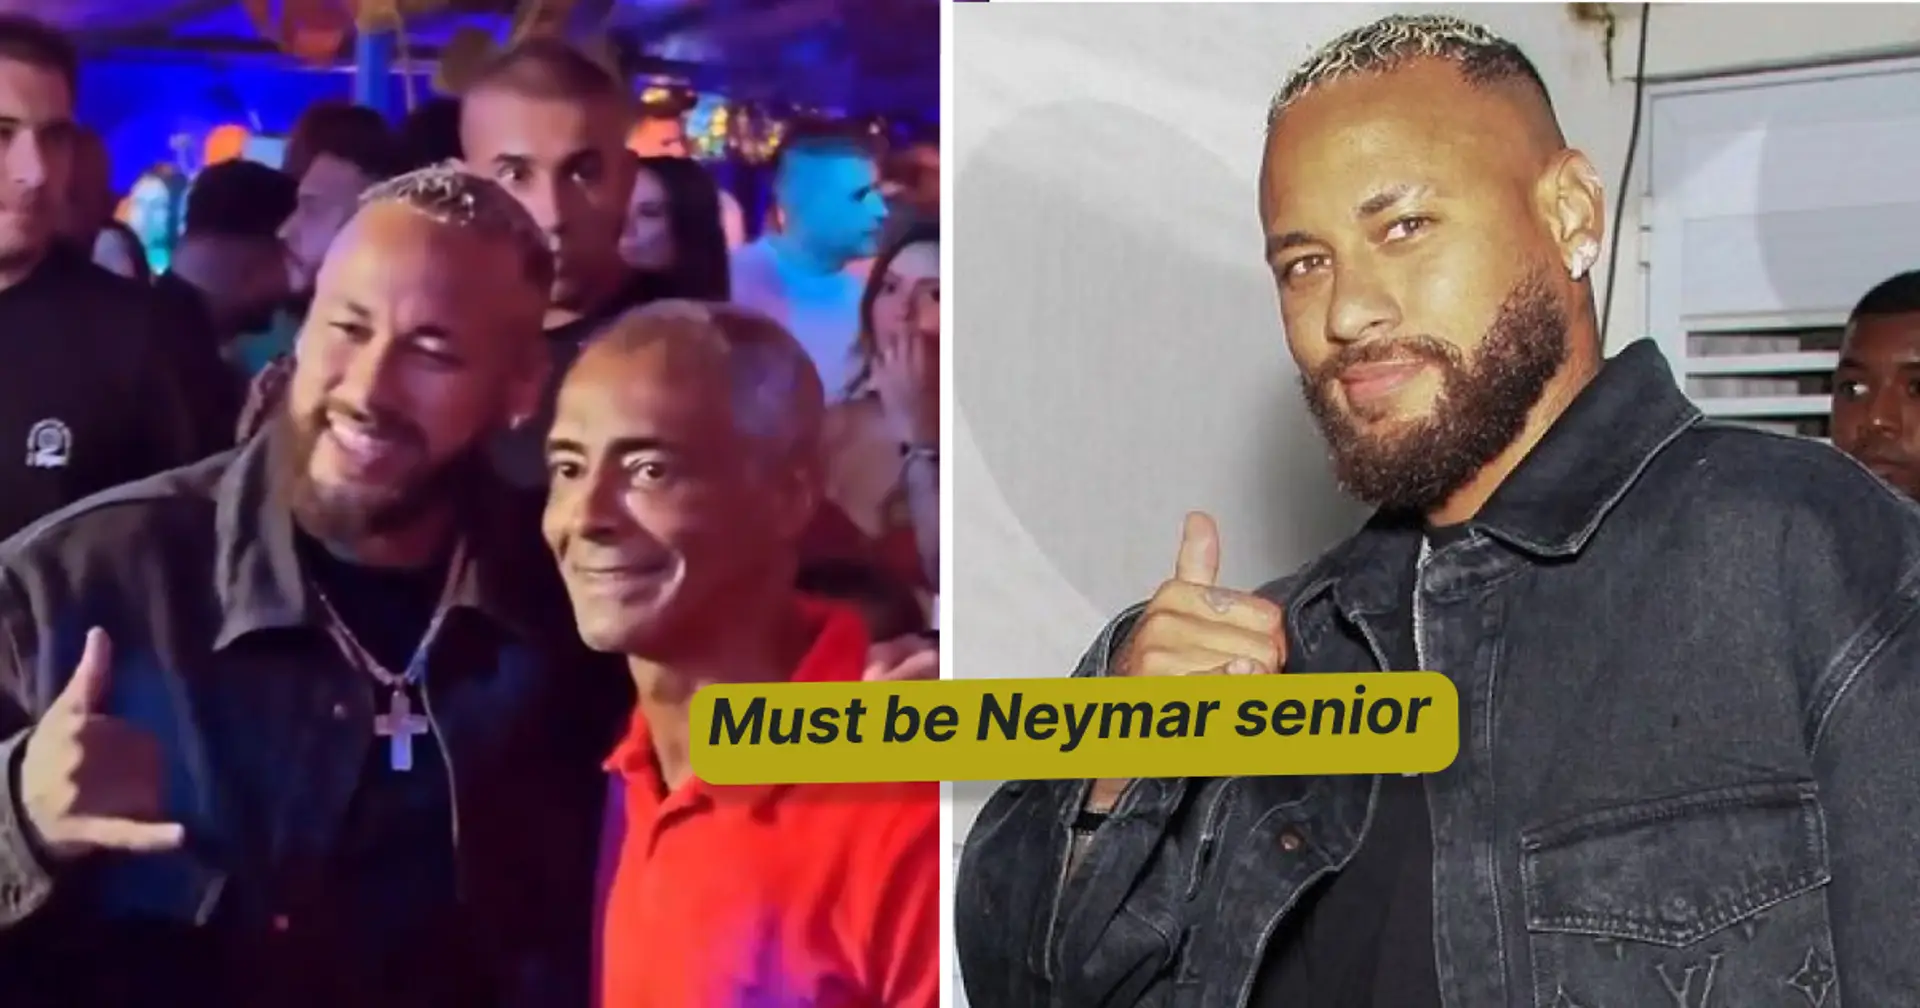 'No way': Fans can't believe what Neymar looks like in recent pics